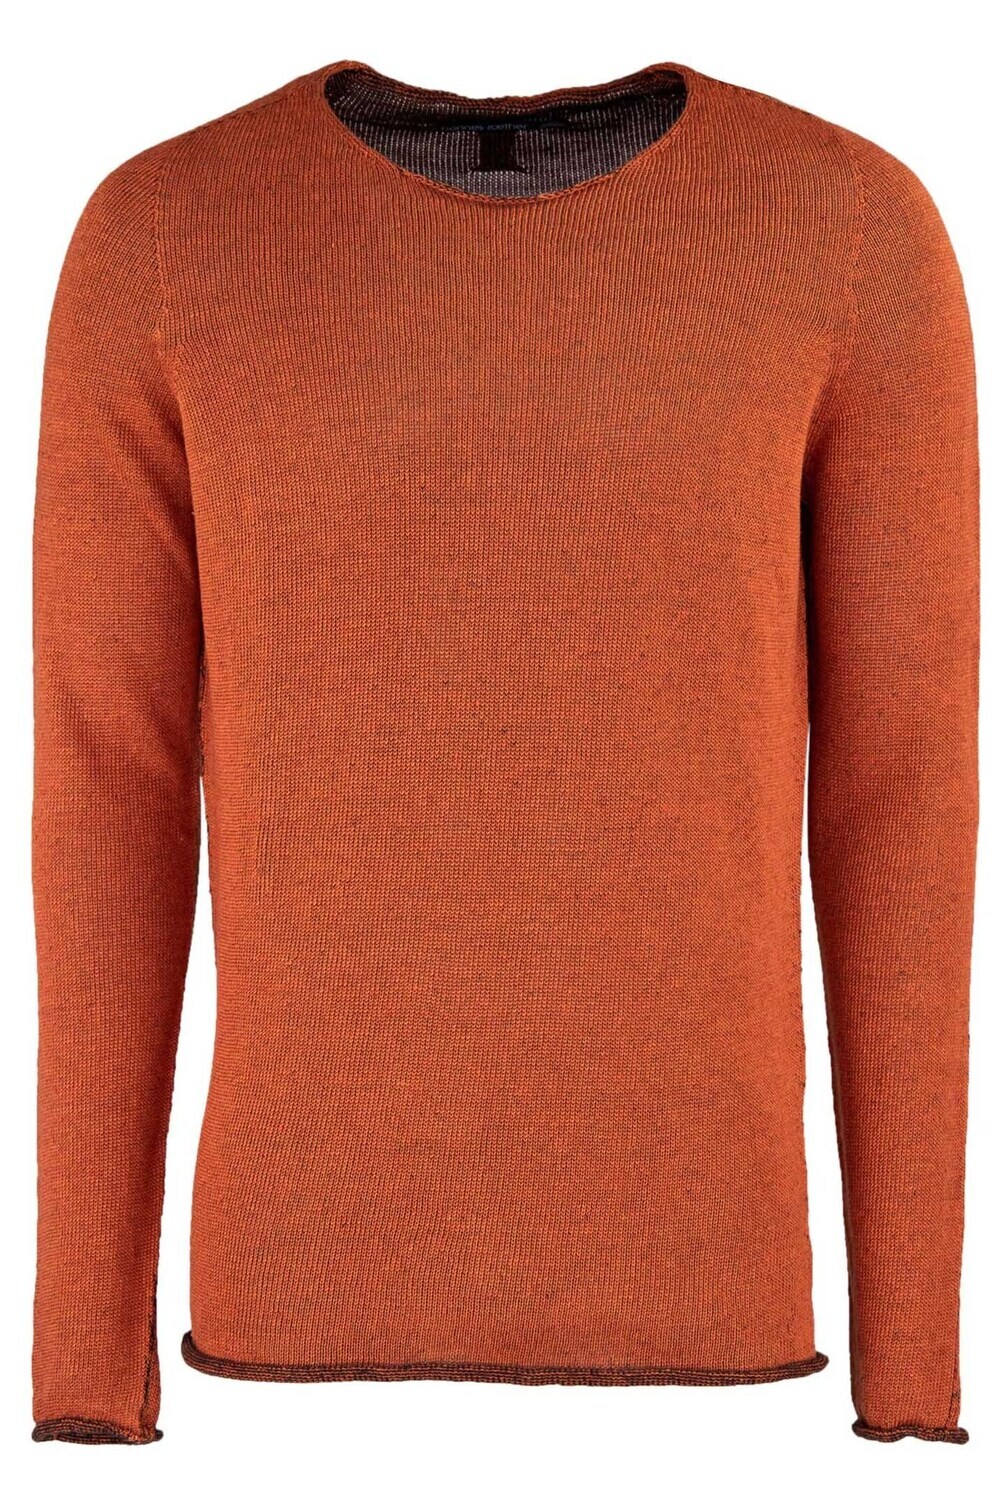 Hannes Roether Pullover SO10BER